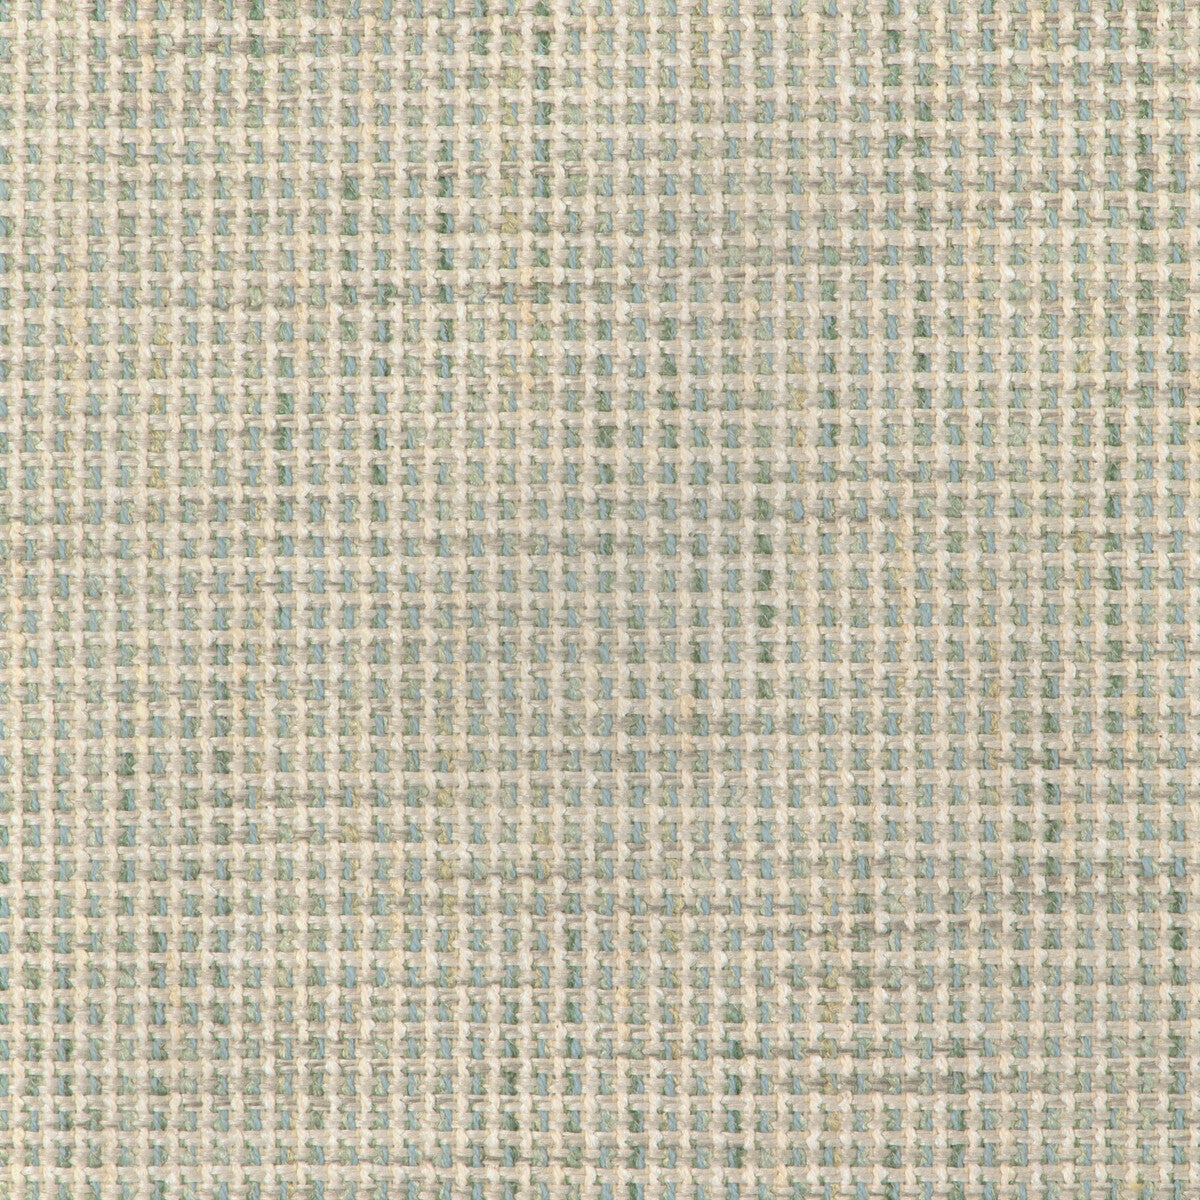 Kravet Design fabric in 37234-115 color - pattern 37234.115.0 - by Kravet Design in the Woven Colors collection